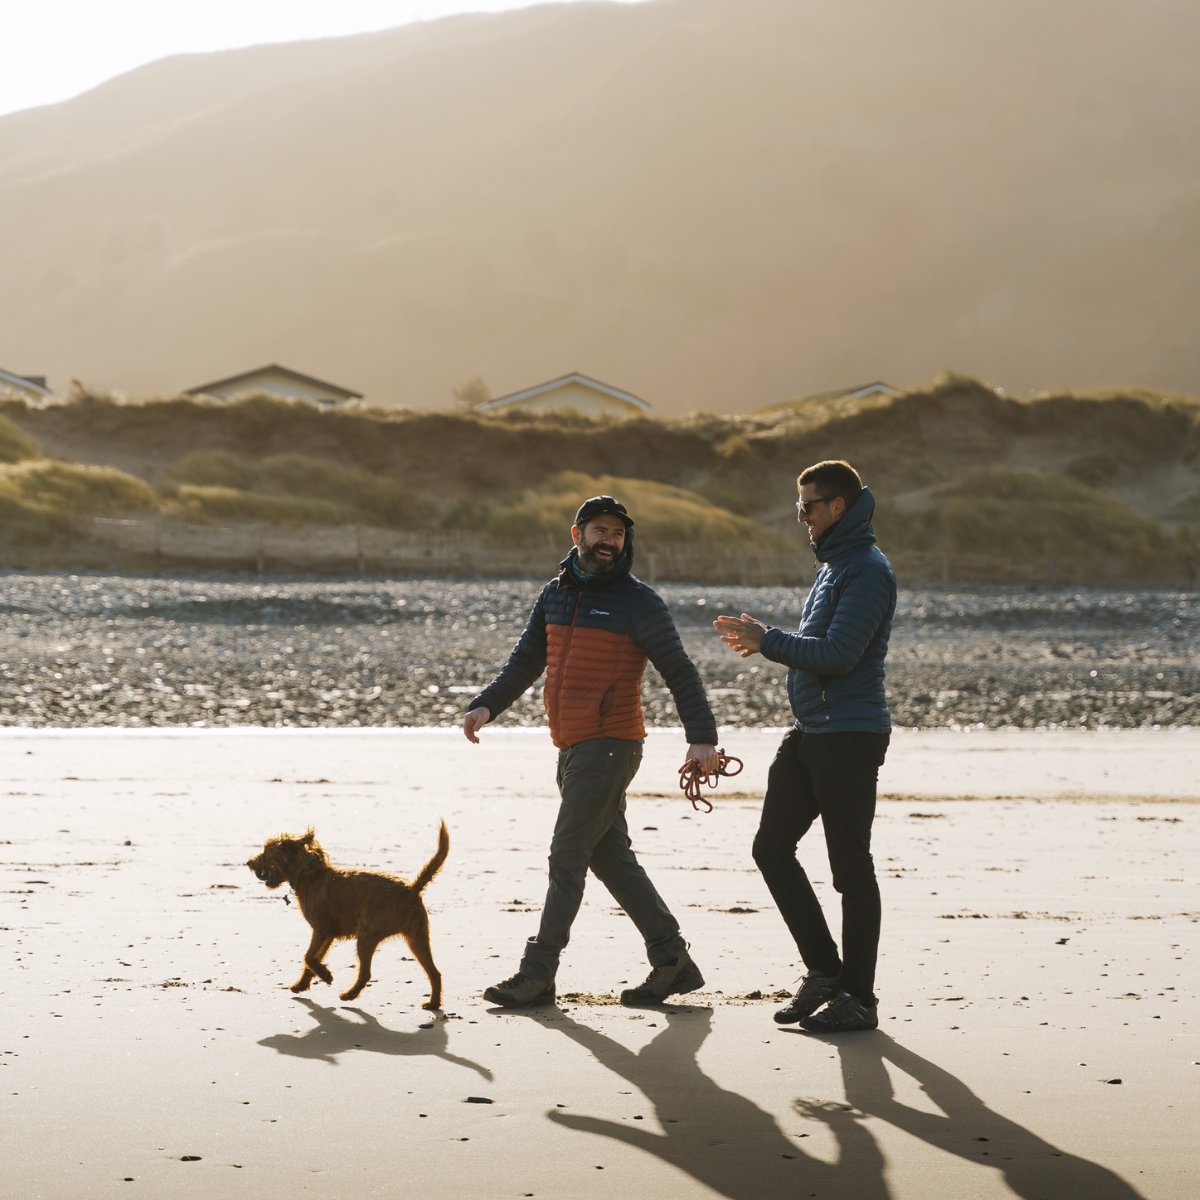 Today marks National walking the dog day🐩 So, it’s a good thing there are plenty of dog-friendly places to stay, eat and explore in Conwy! ☕ Grab a bite at Dudley & George’s 🌳 Bound around the 80 acres of Bodnant Garden 🐶Visit Pet Palace Abergele bit.ly/47wATKW